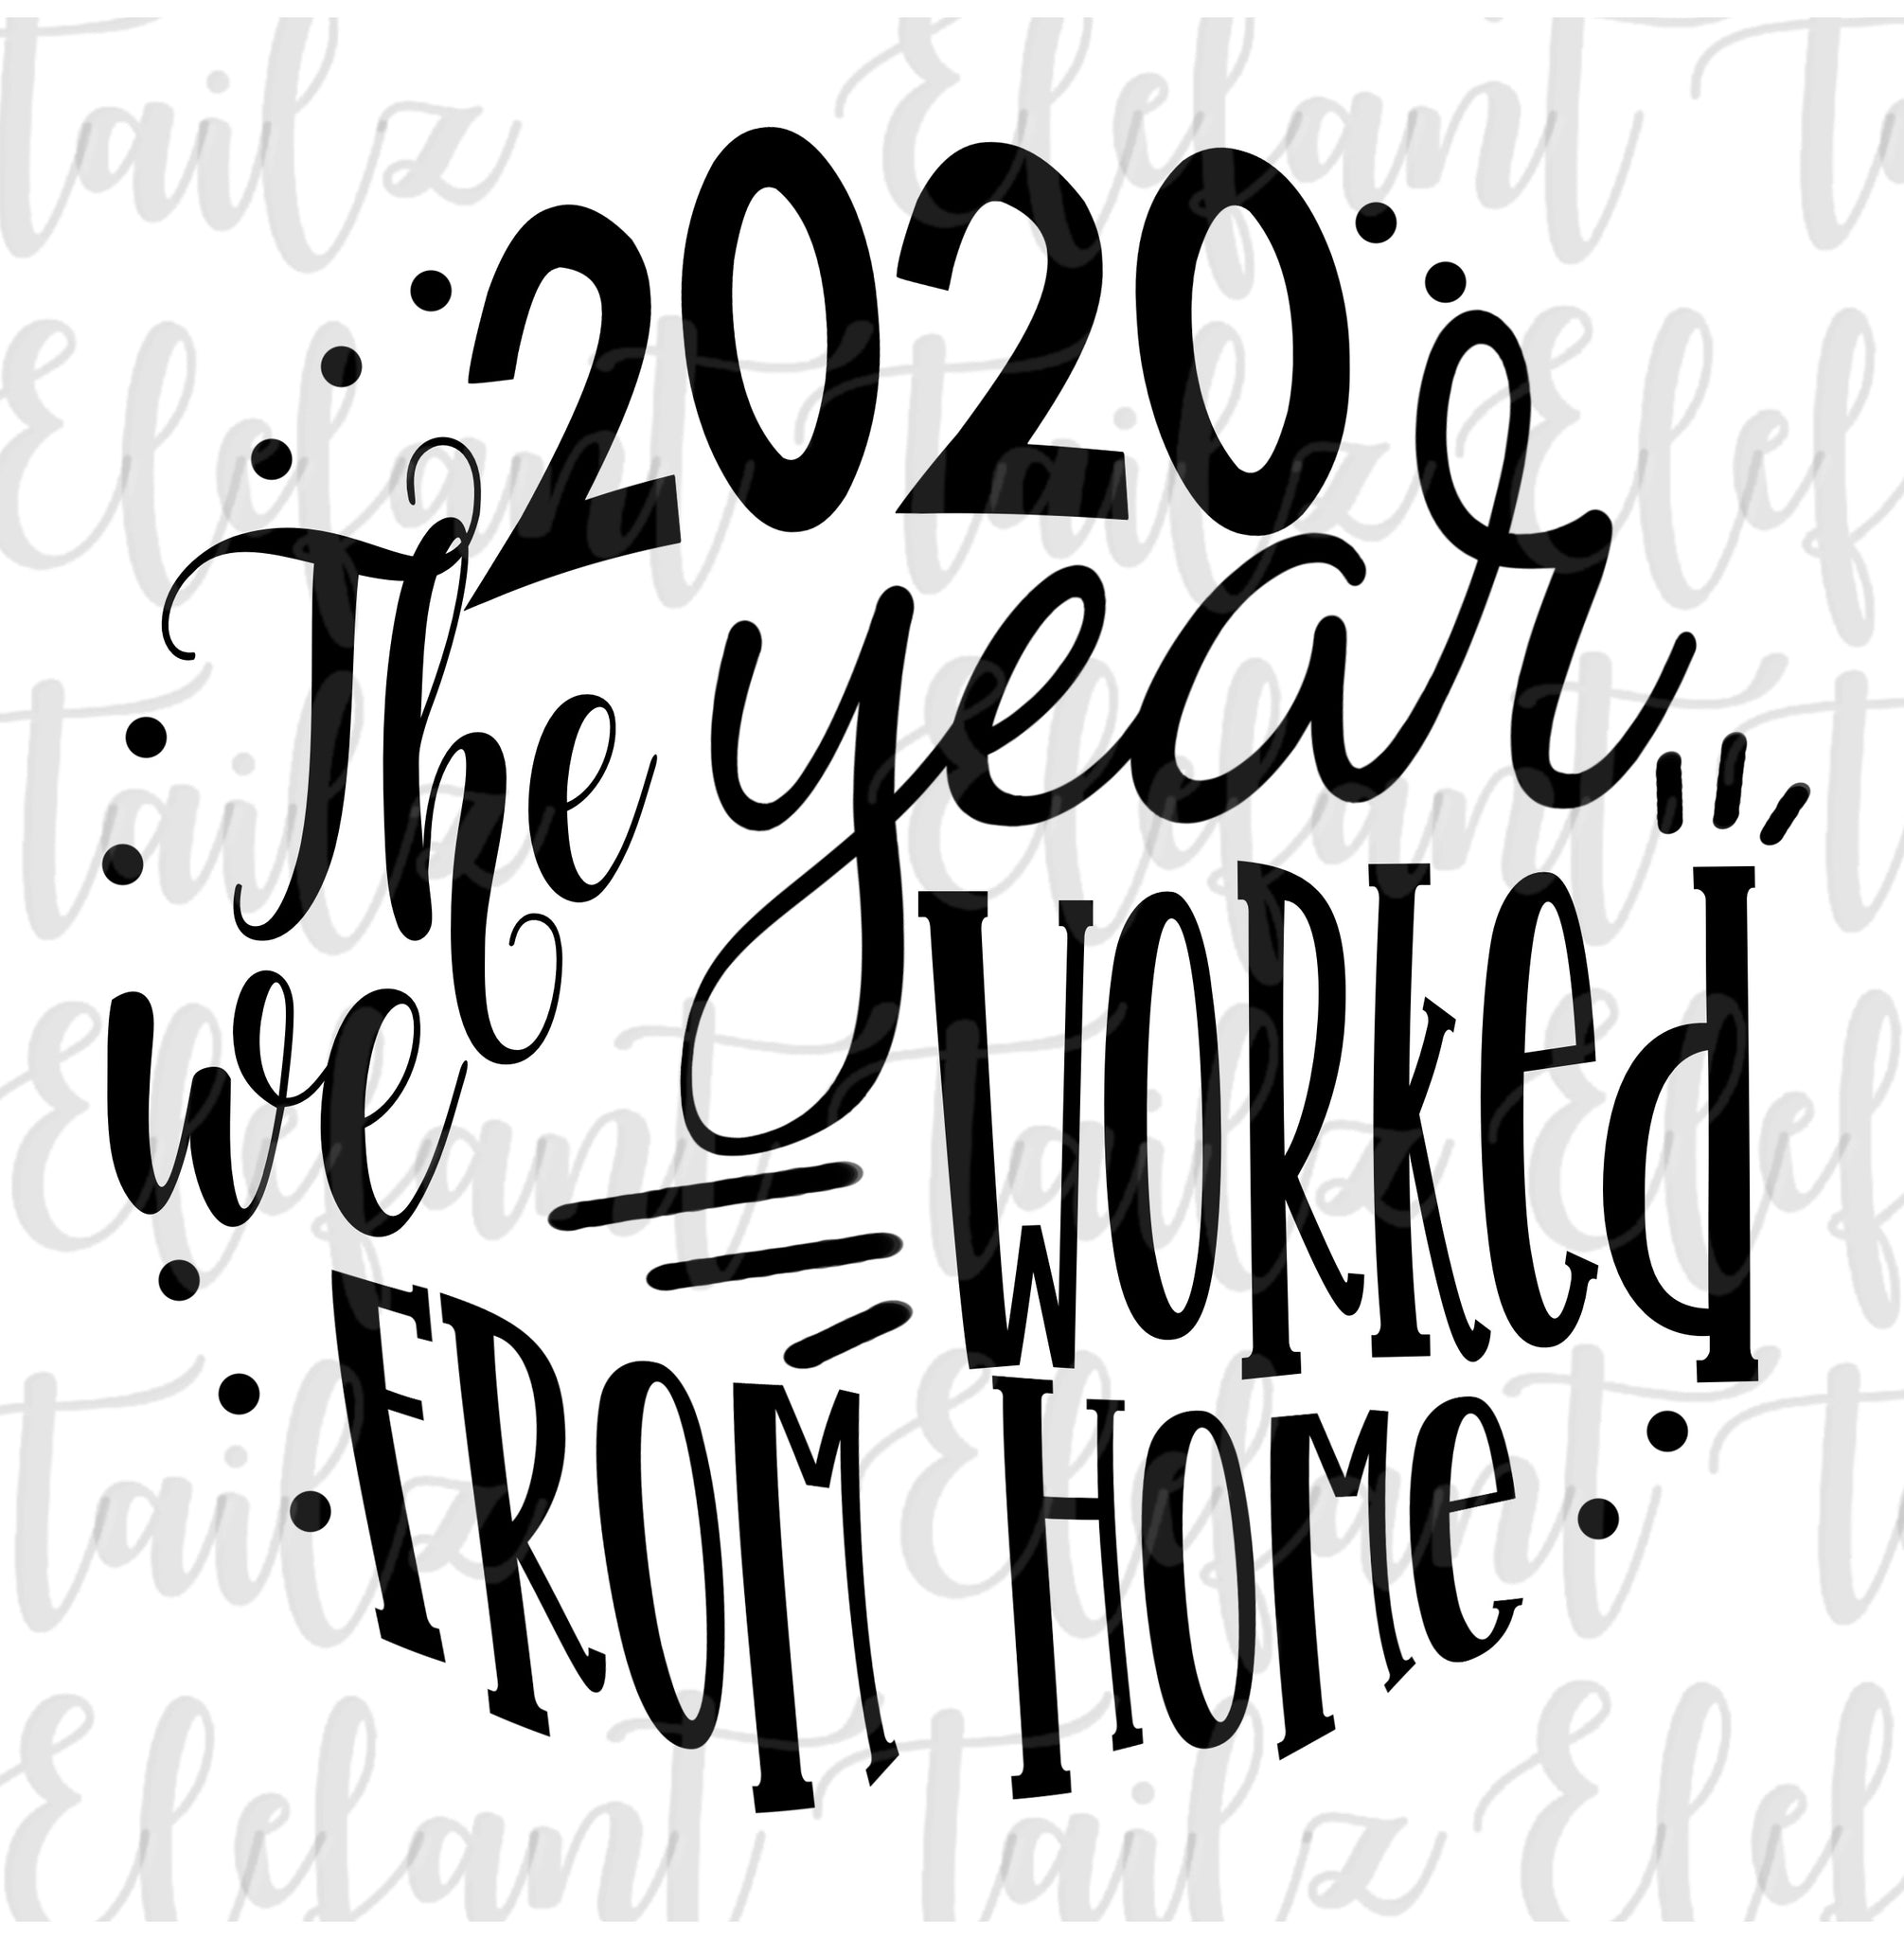 Ornament Rounds - 2020 Year Worked From Home #2